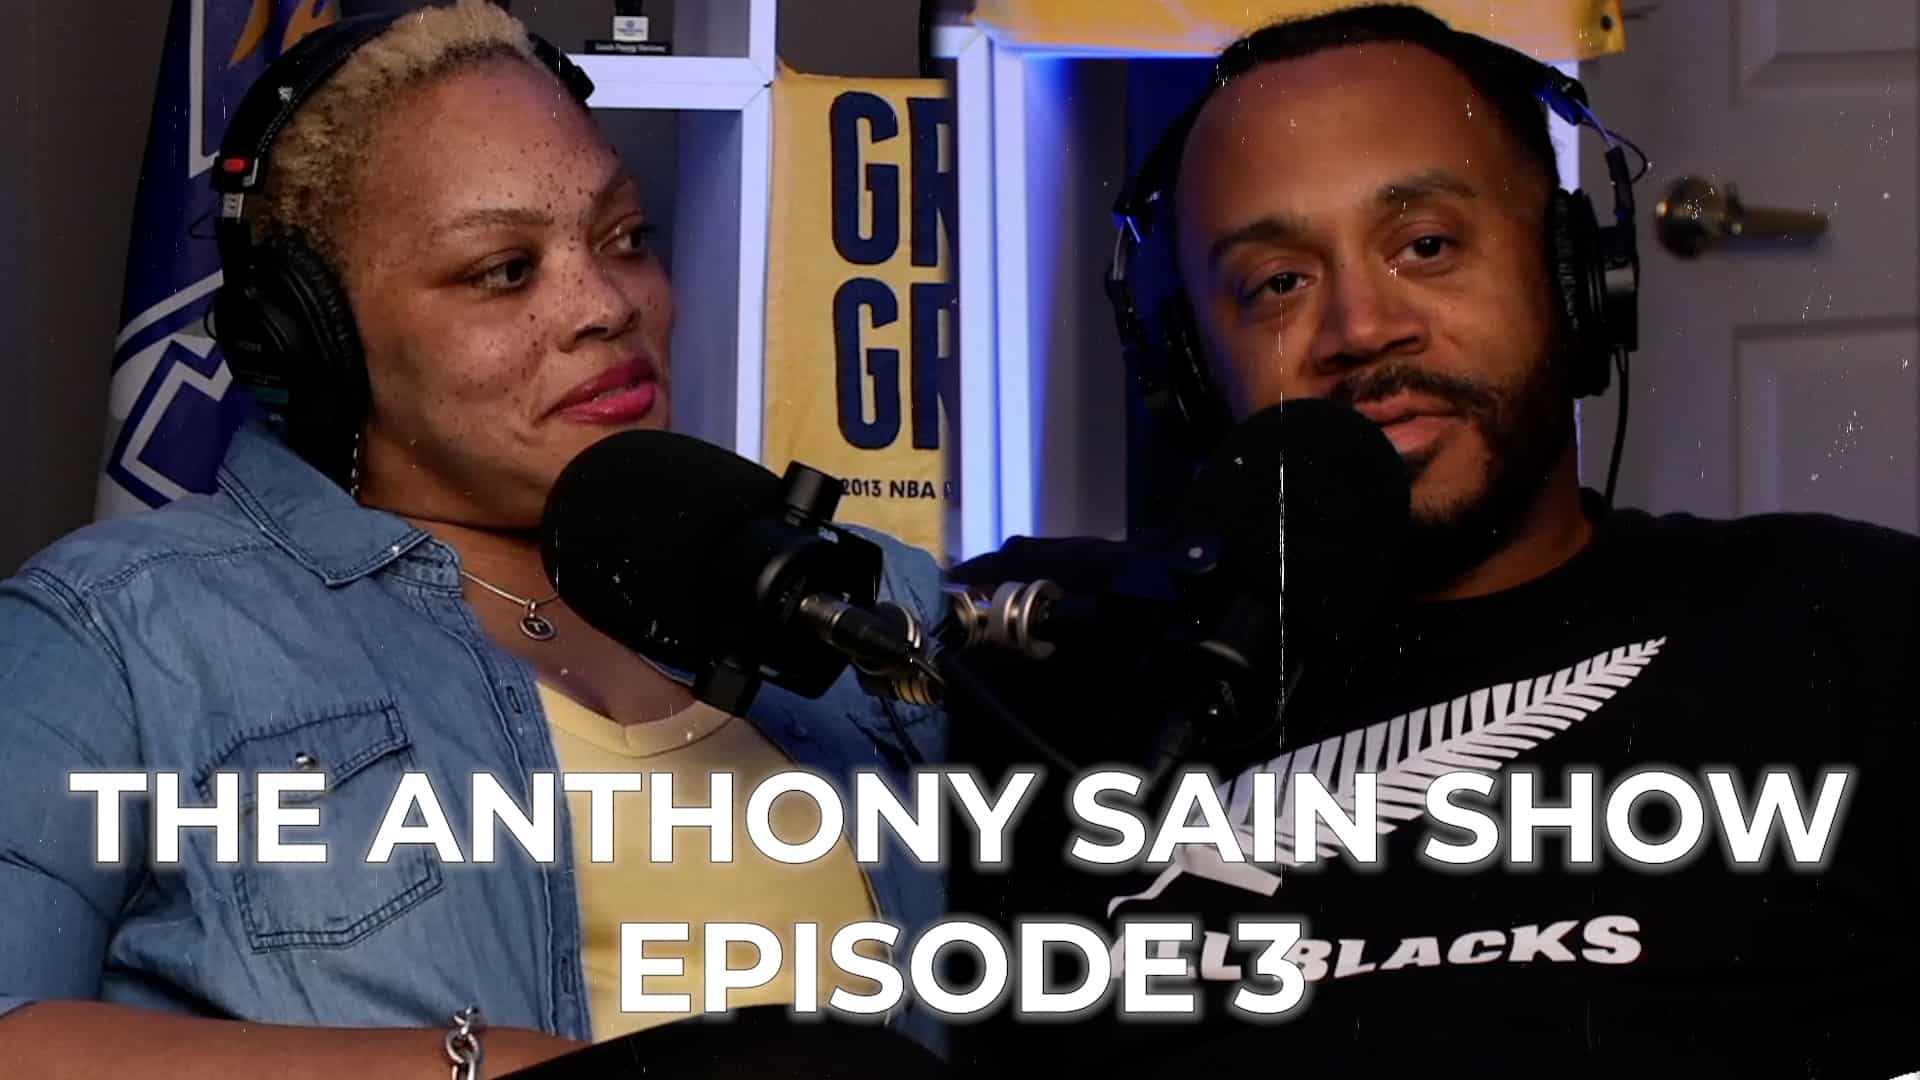 Featured image for “The Anthony Sain Show Ep 3: Stick to Sports”